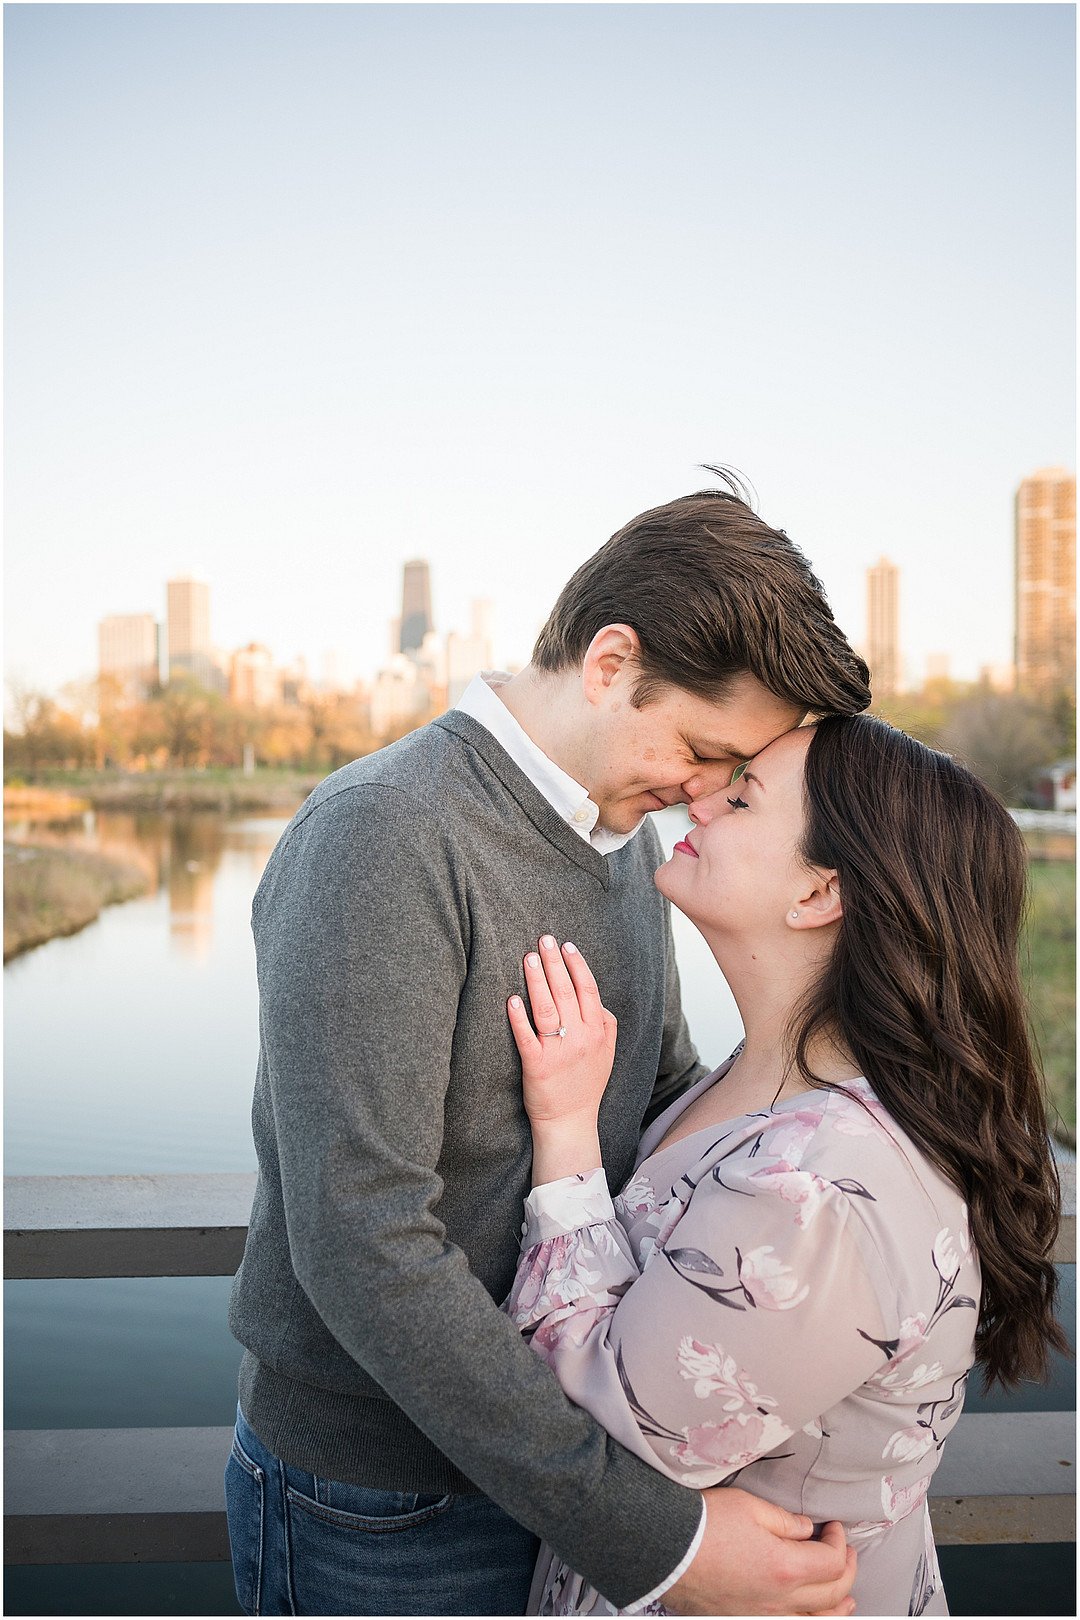 shoemaker_WitKowski_Winterlyn Photography_Lincoln Park Chicago Engagement _0220_low.jpg